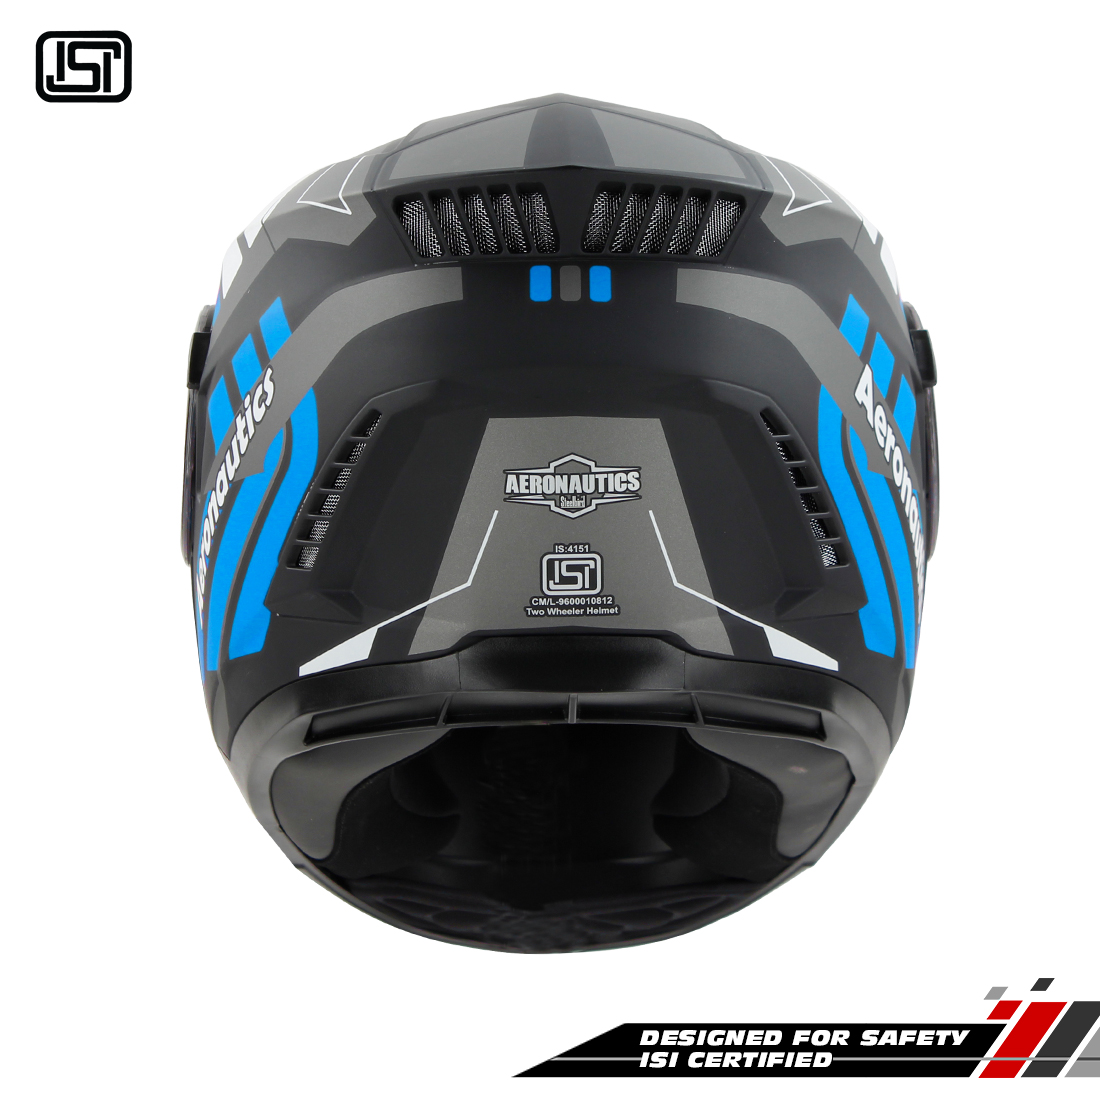 Steelbird SBH-40 Vanguard ISI Certified Full Face Graphic Helmet For Men And Women With Inner Sun Shield (Glossy Black Blue)